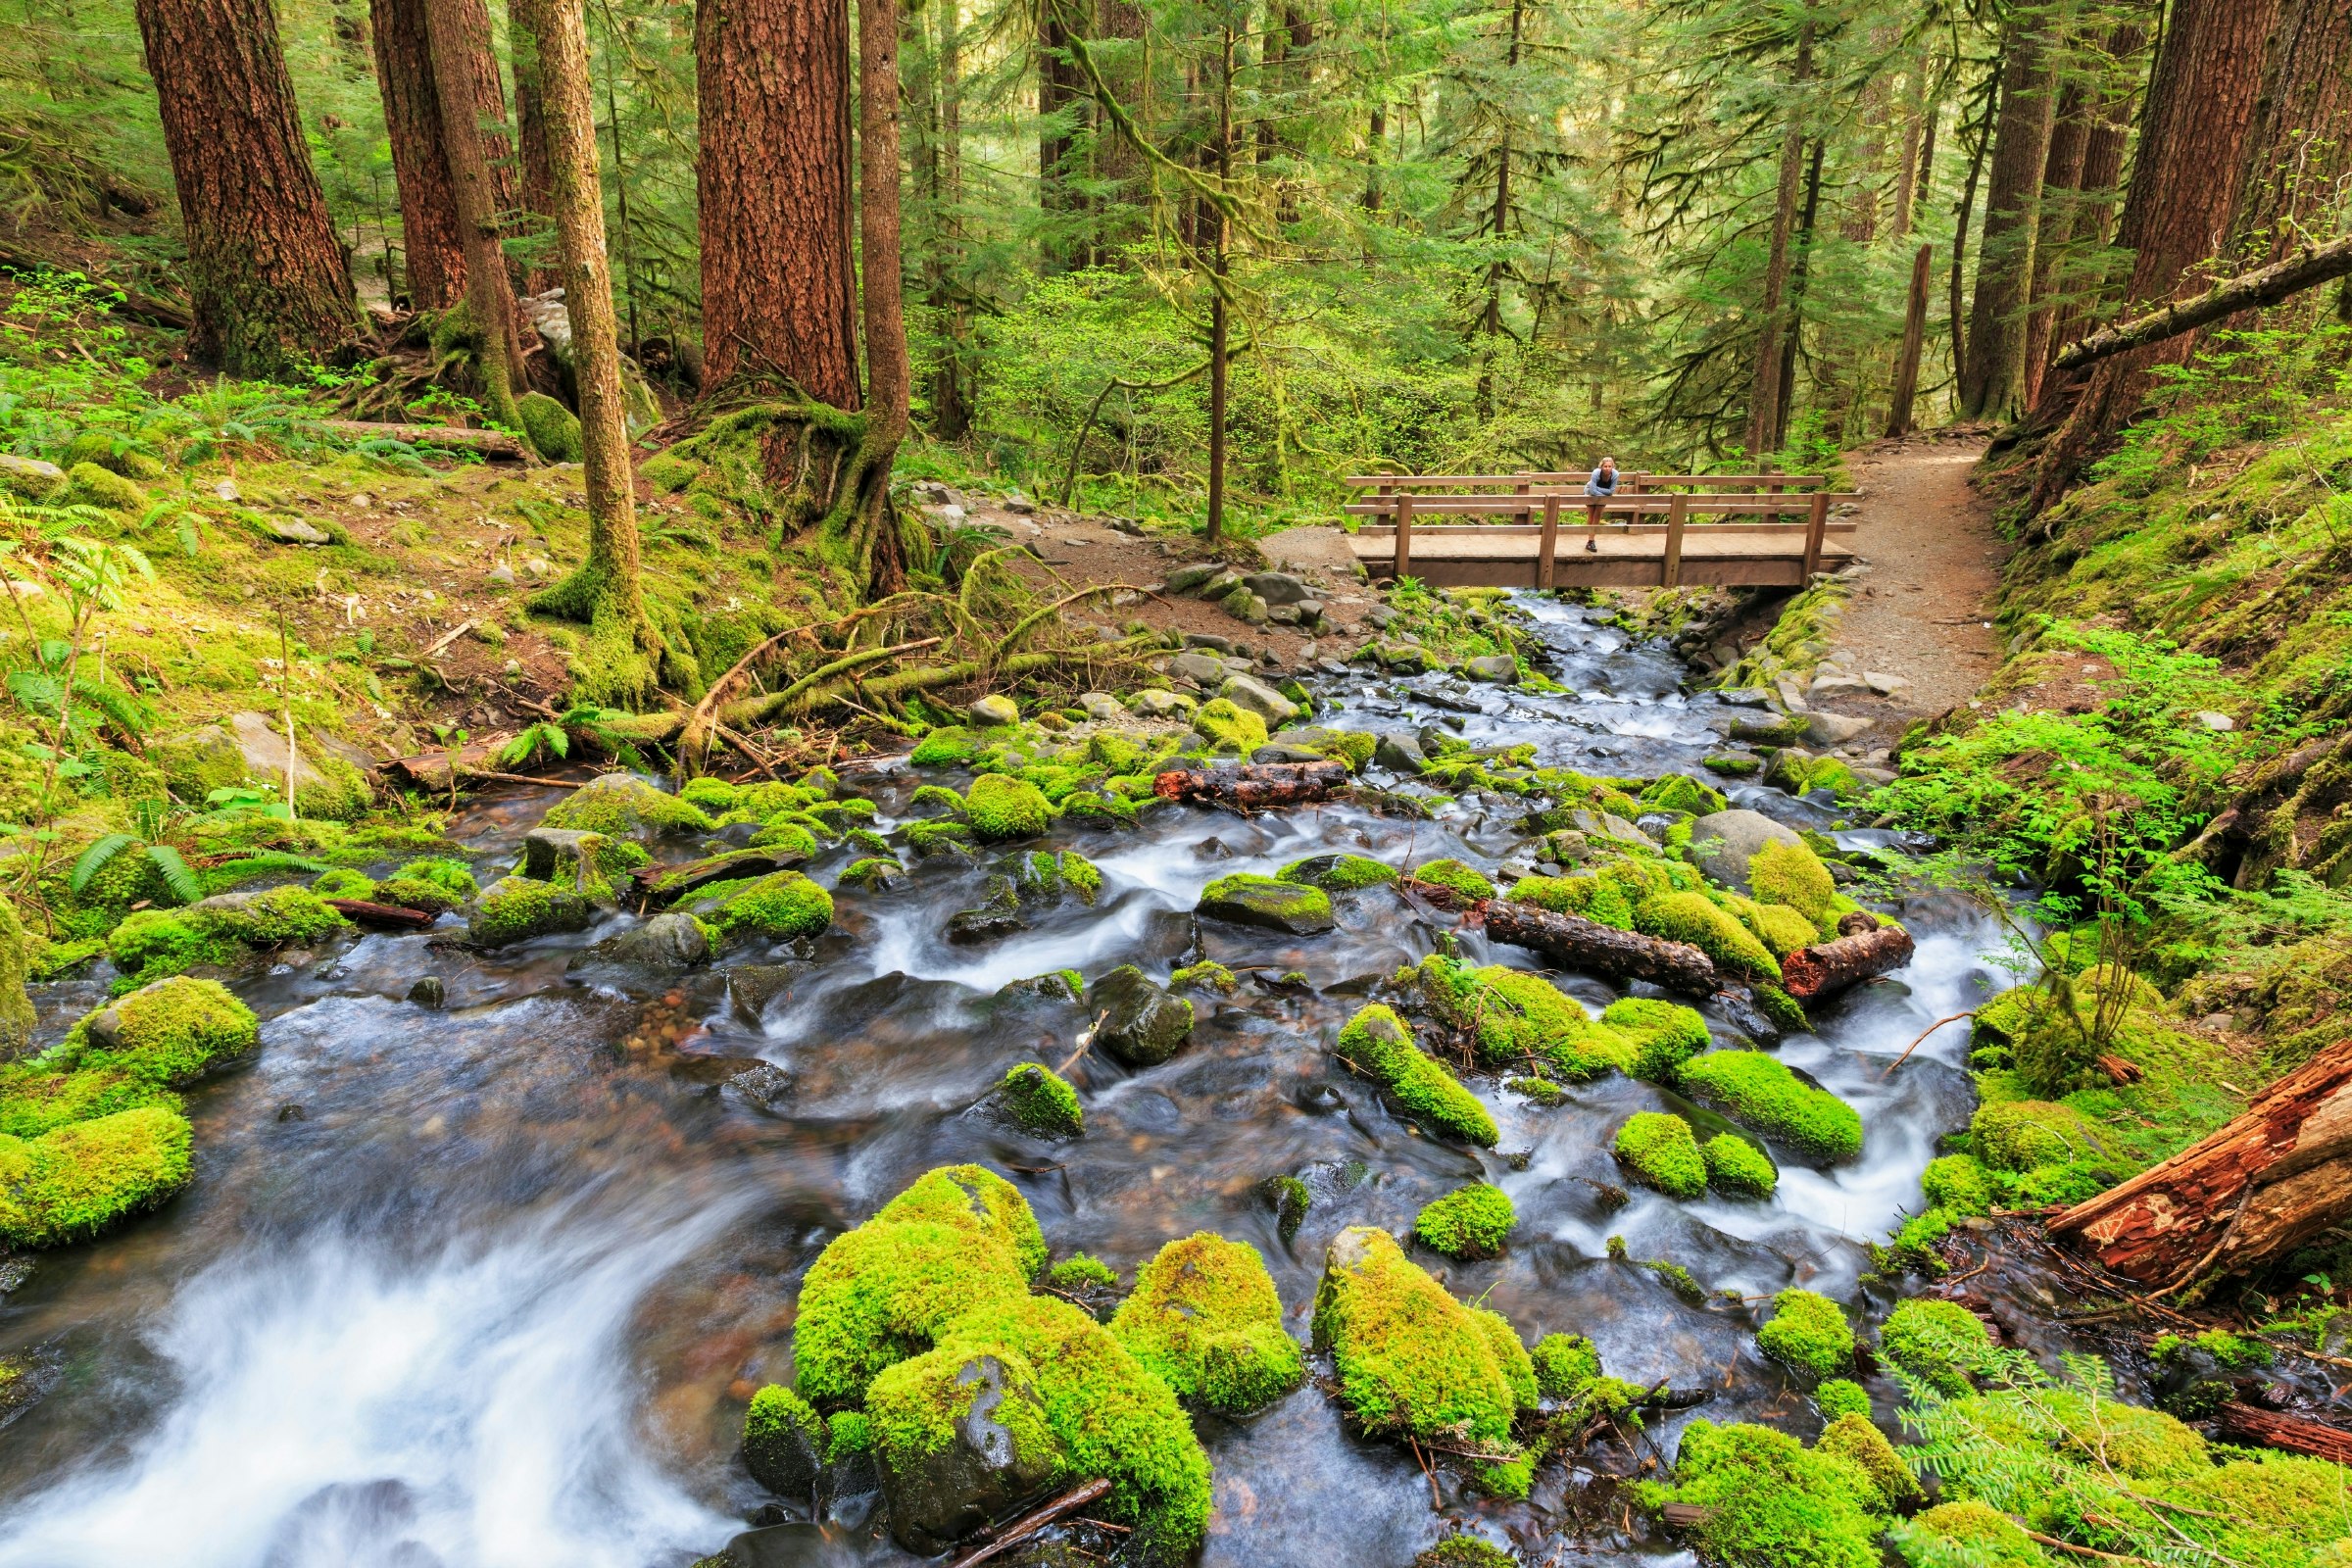 Sol Duc river, cascade and wooden bridge, Olympic National Park, Washington 